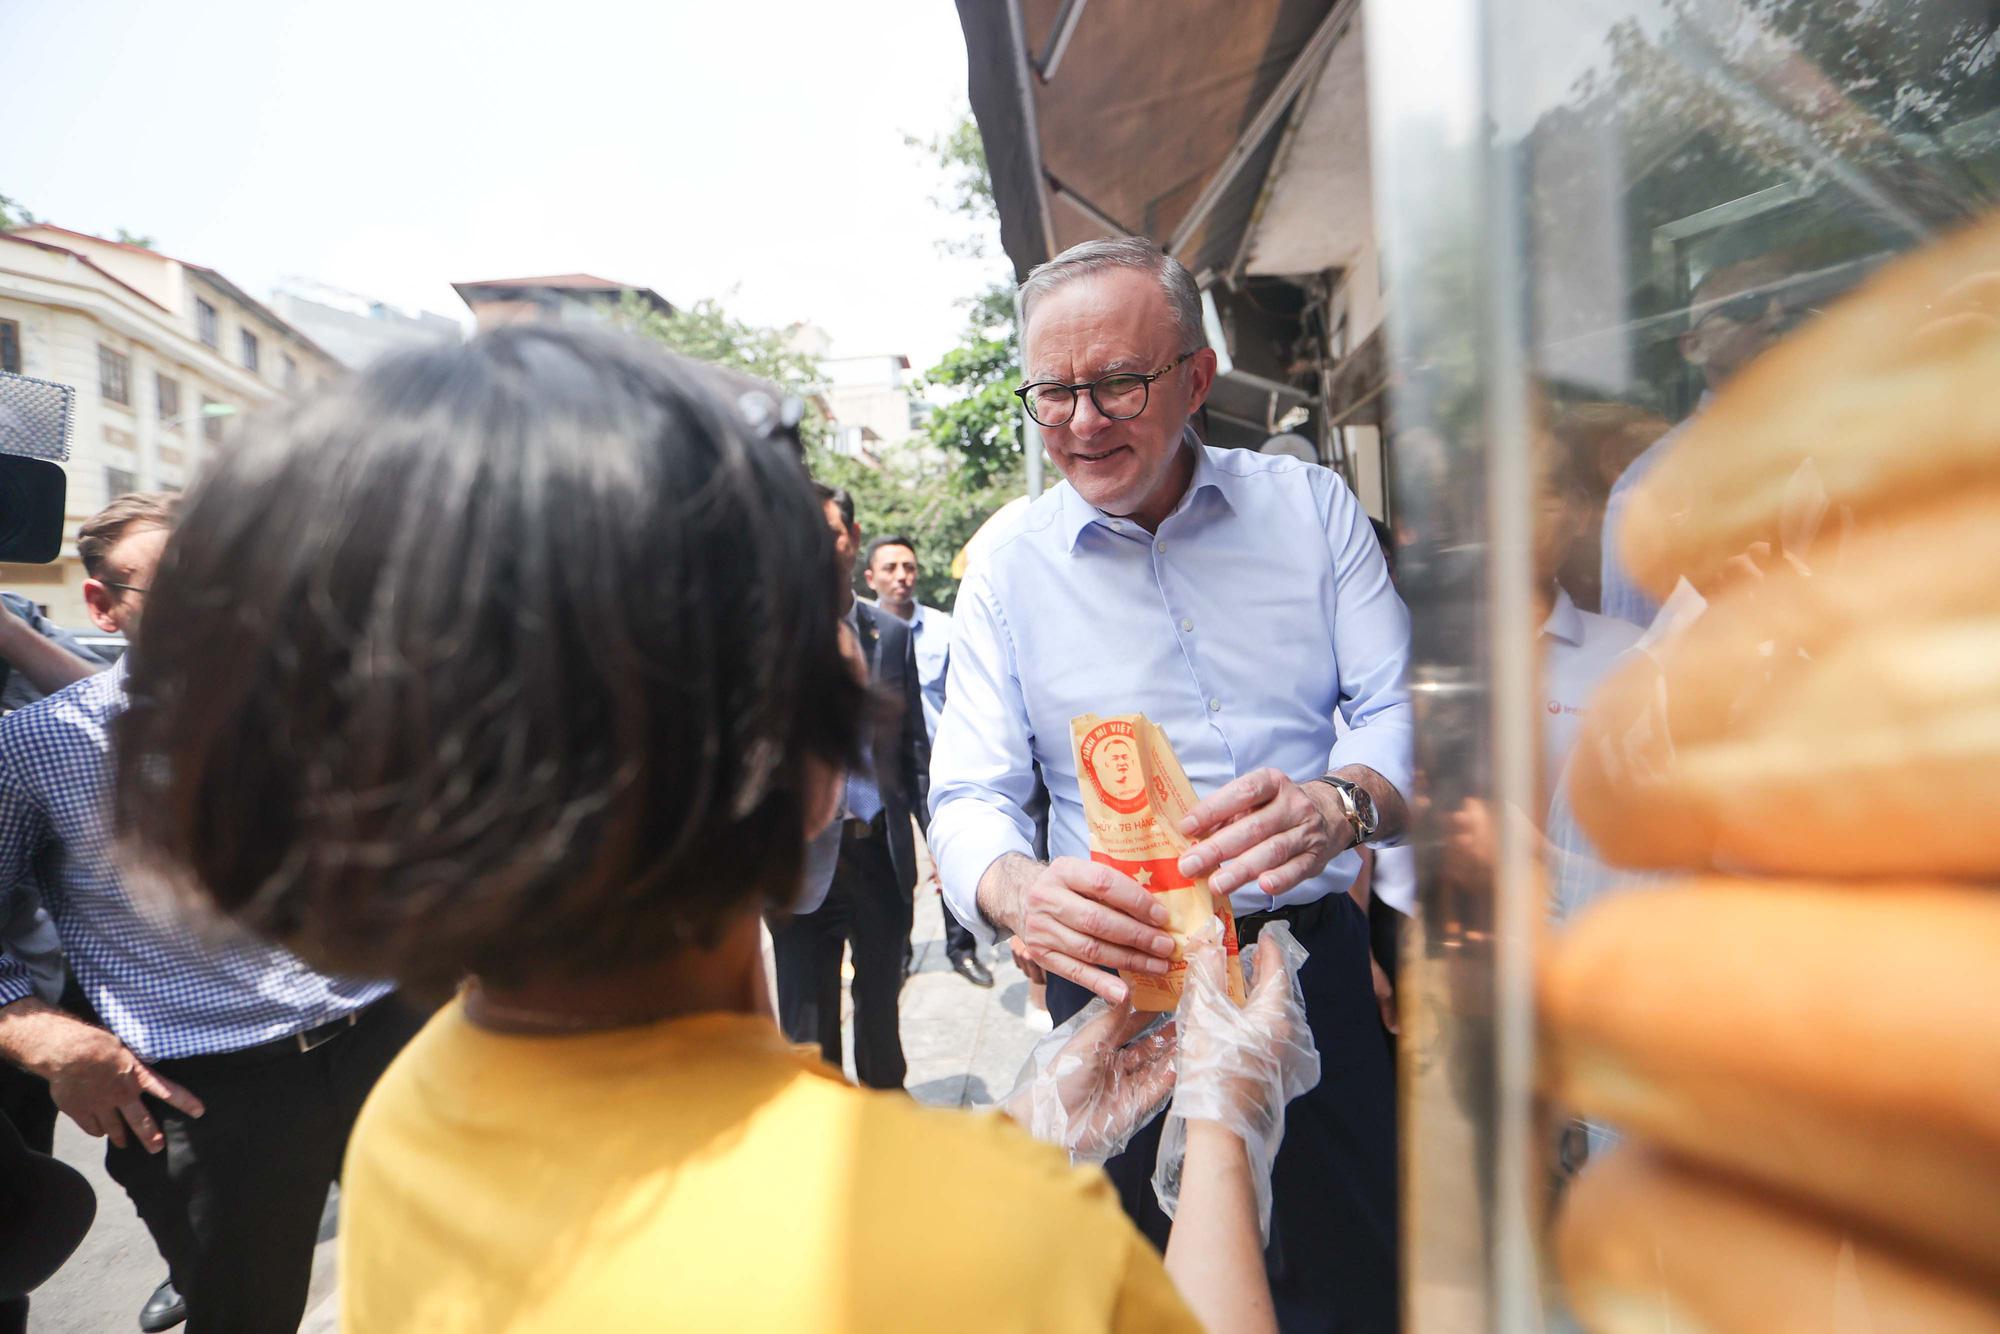 A staff member of a banh mi stall gives banh mi to PM Albanese